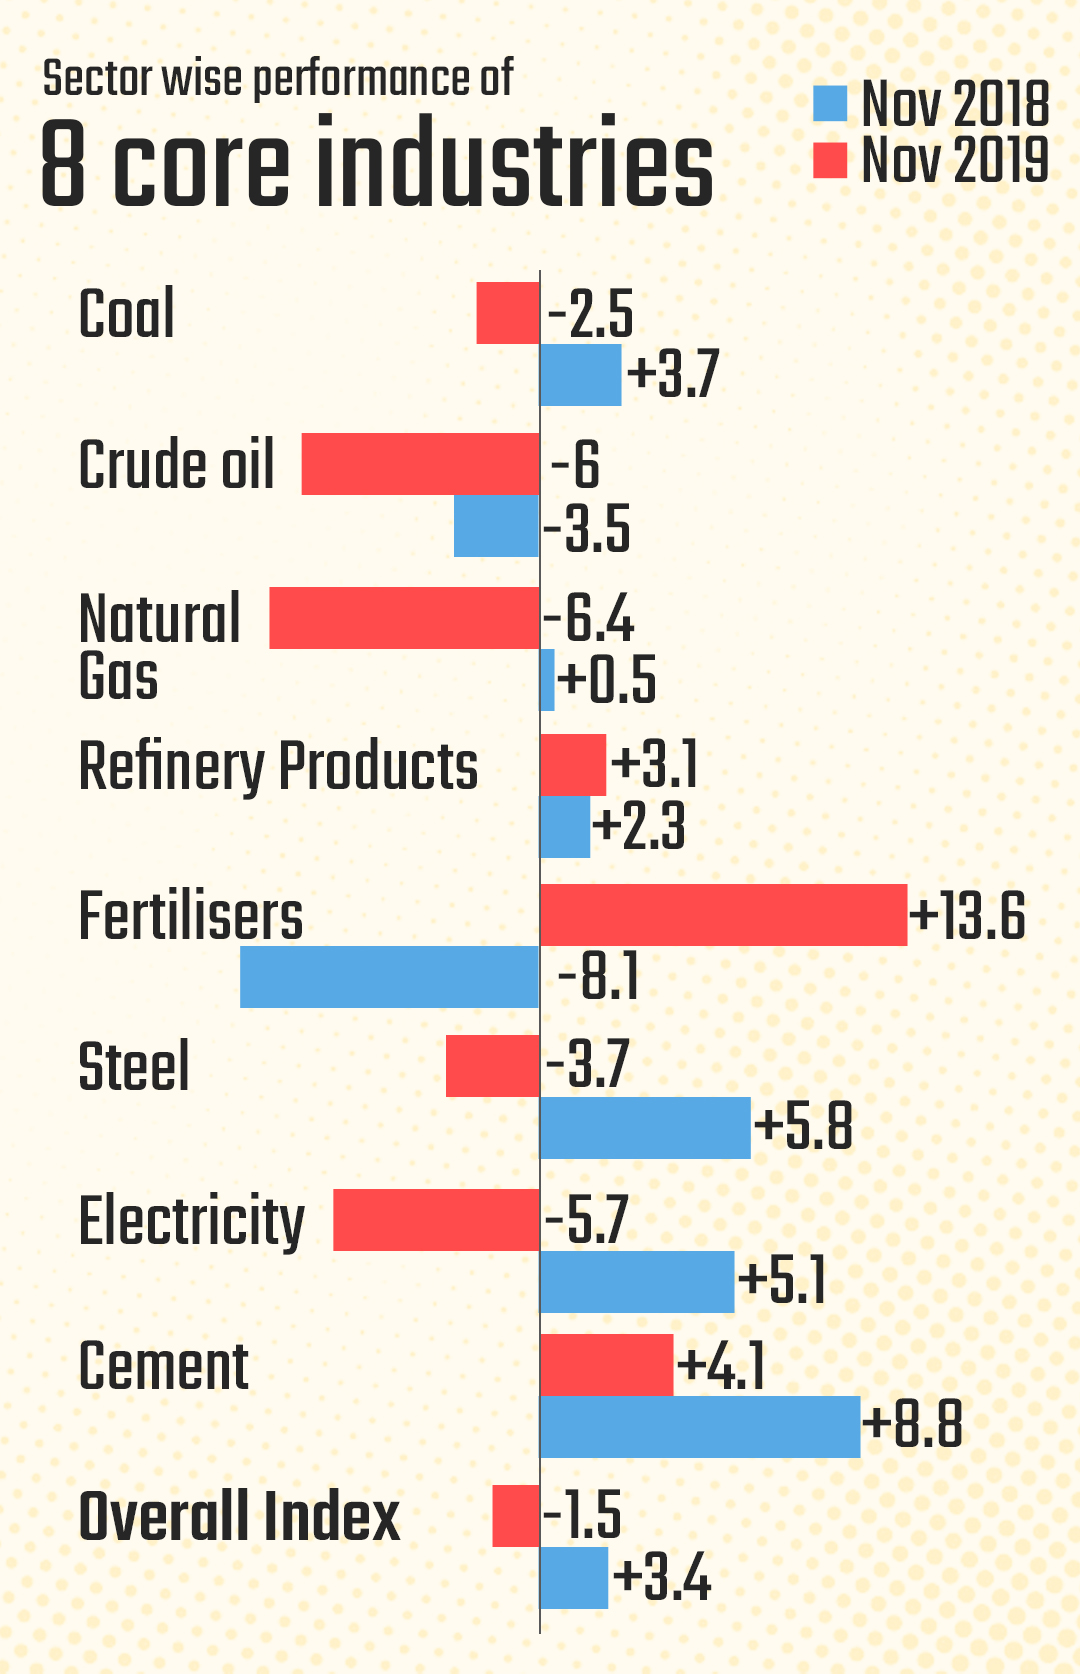 Sector wise performance of 8 core industries in Nov 2018 & 2019